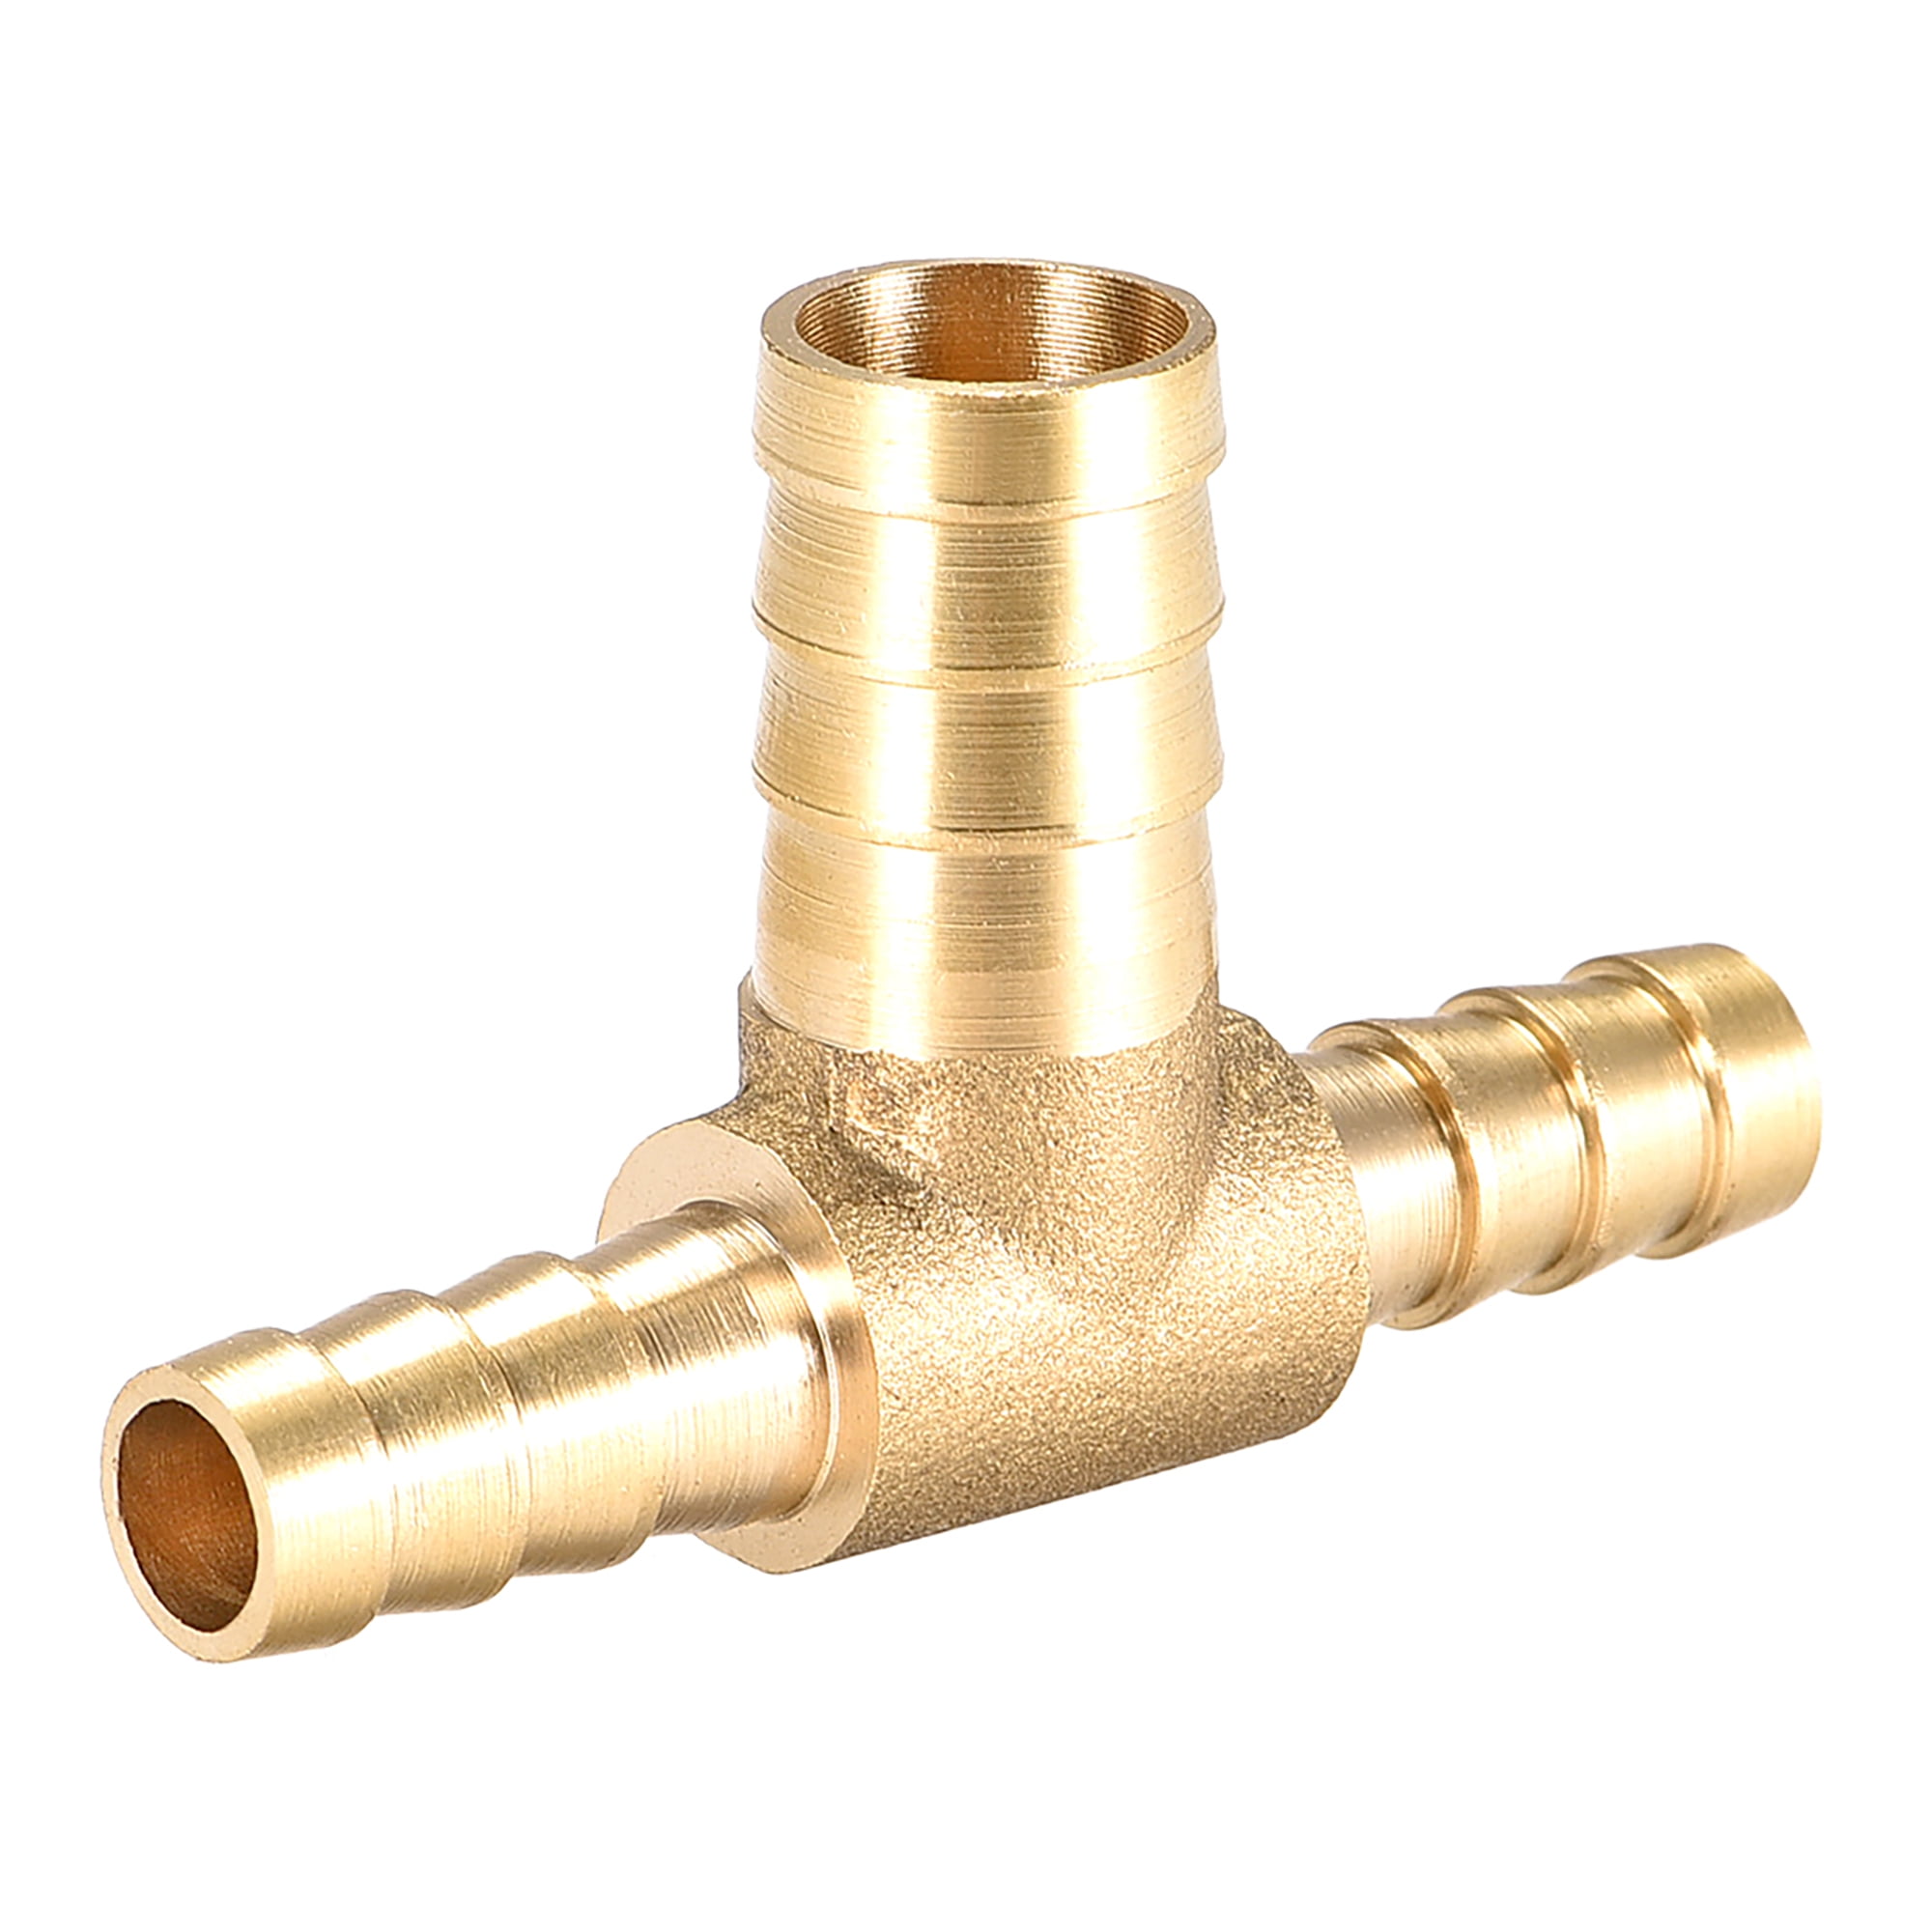 T-PIECE COMPRESSION FITTINGS PACK OF 2 CONNECTORS 8mm TEE GAS COPPER PIPE TUBE 